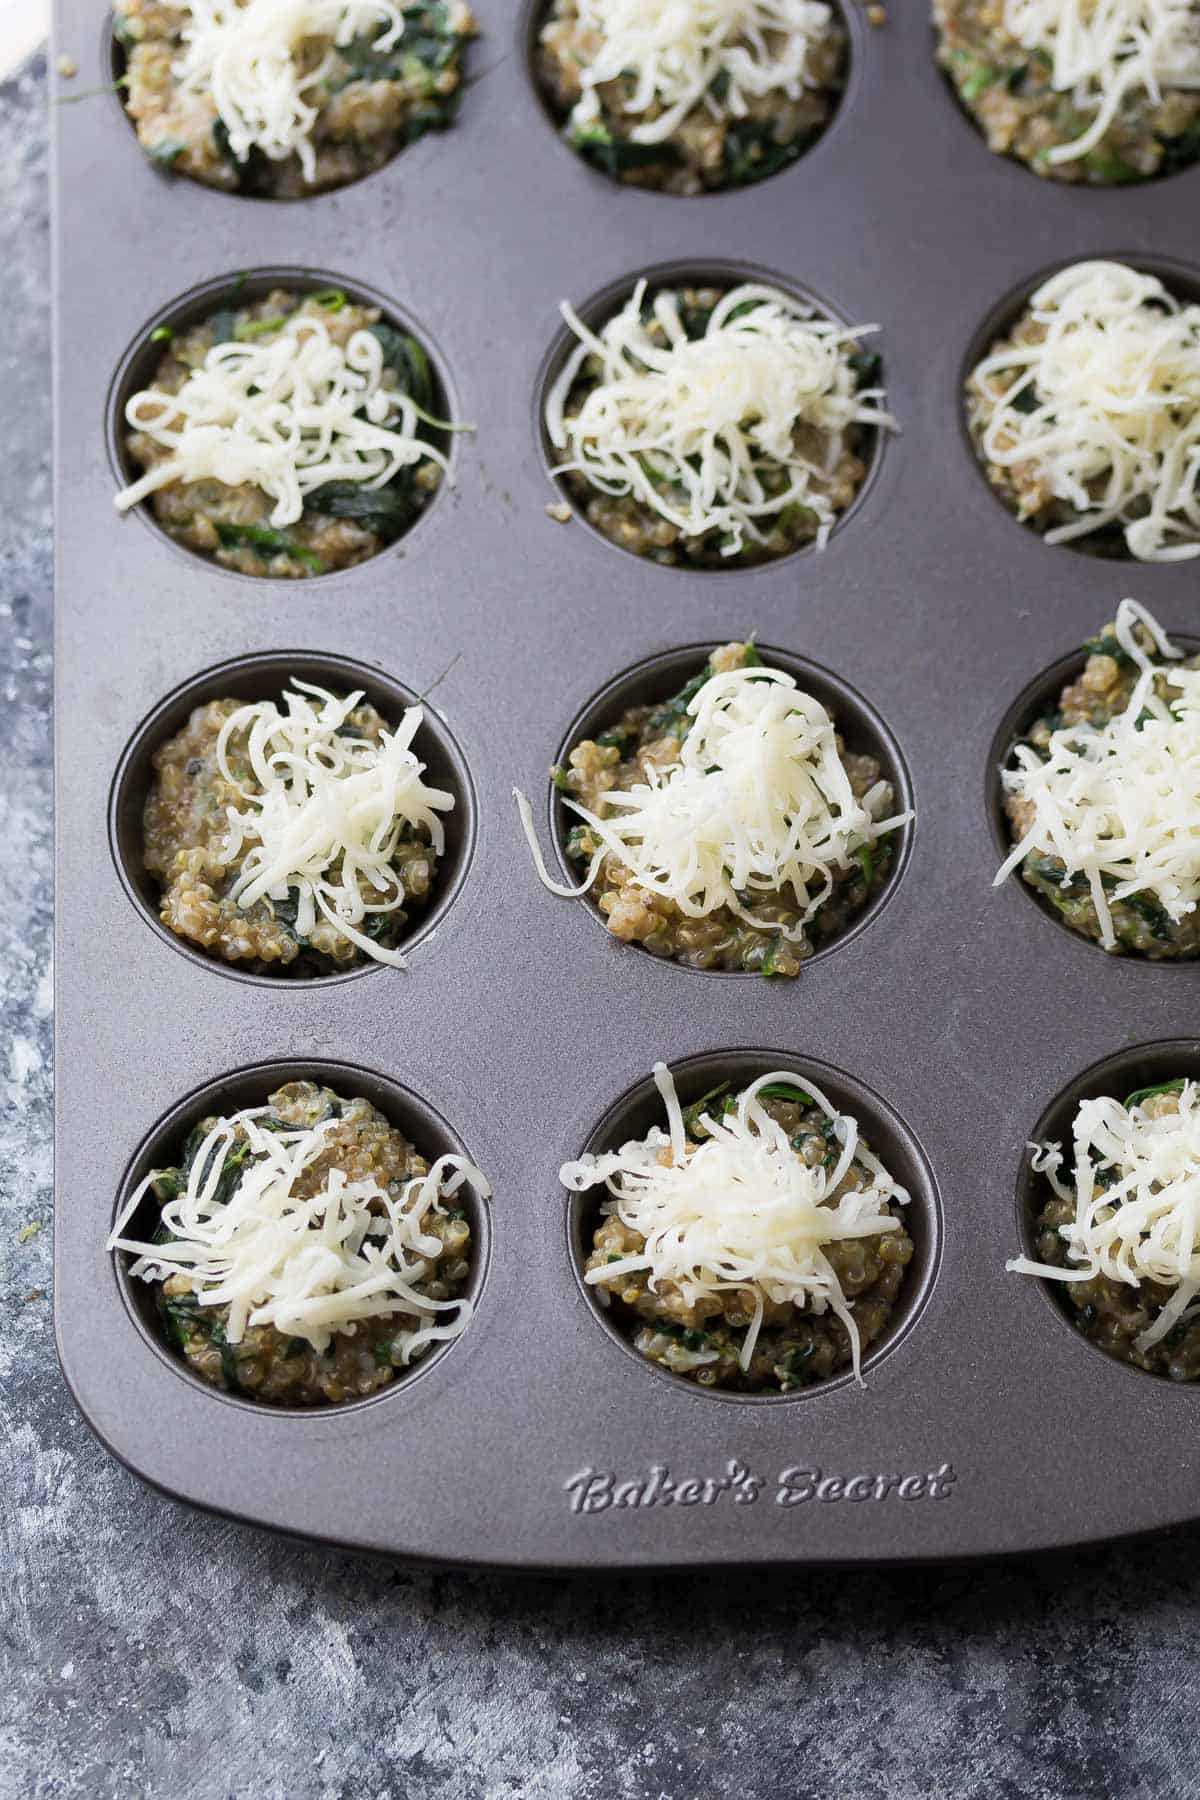 Cheesy Spinach Quinoa Cups mixture in muffin baking tin with shredded cheese on top before baking